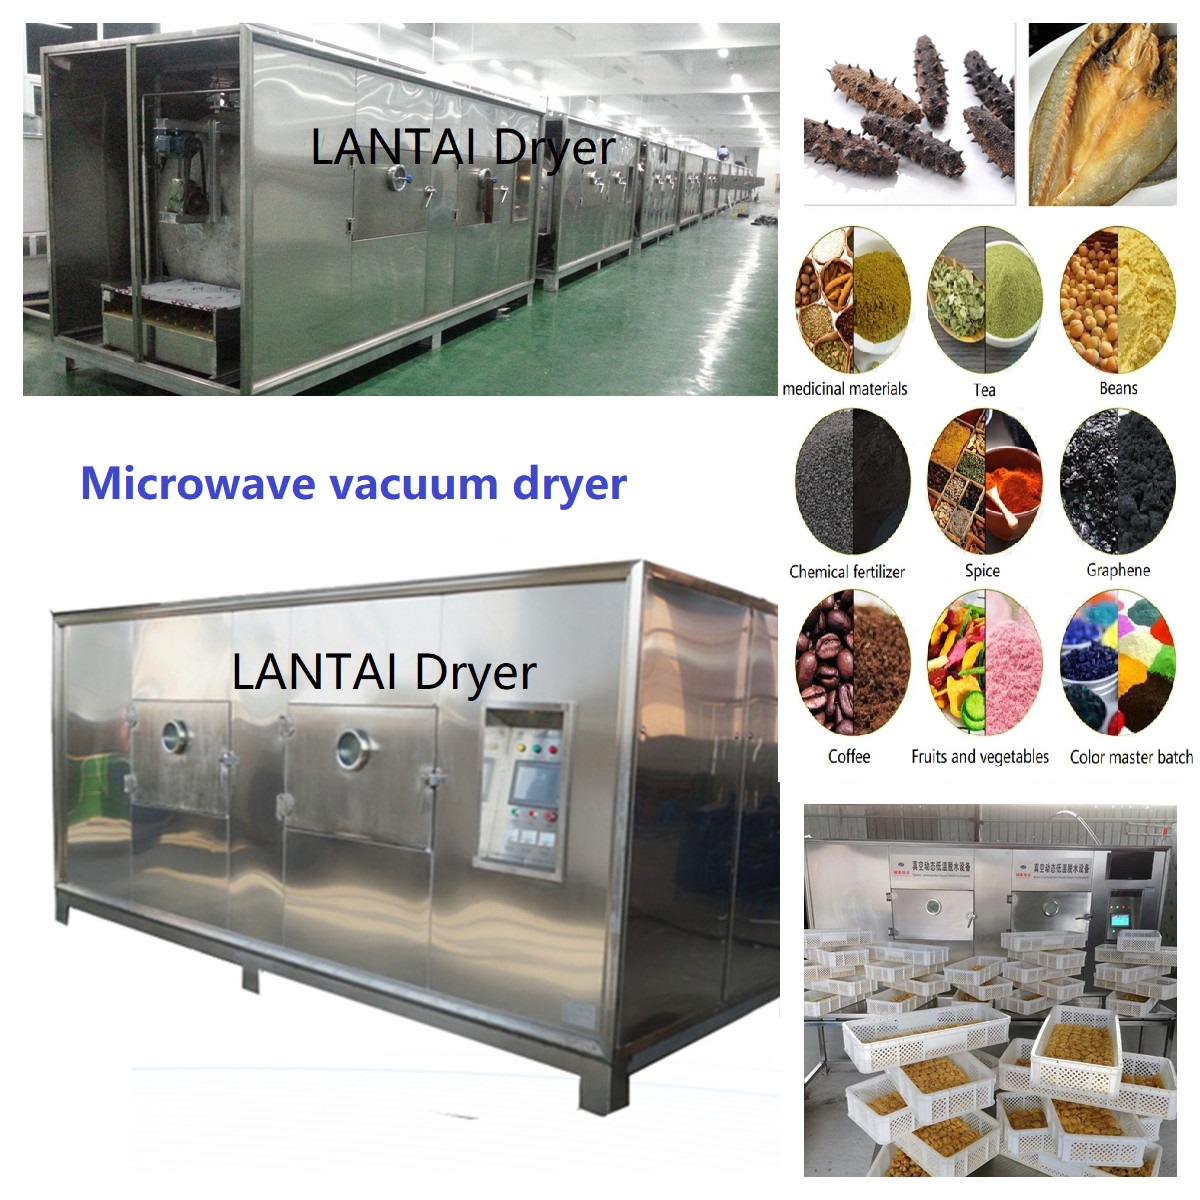 The stage of freeze-drying machine and points for attention